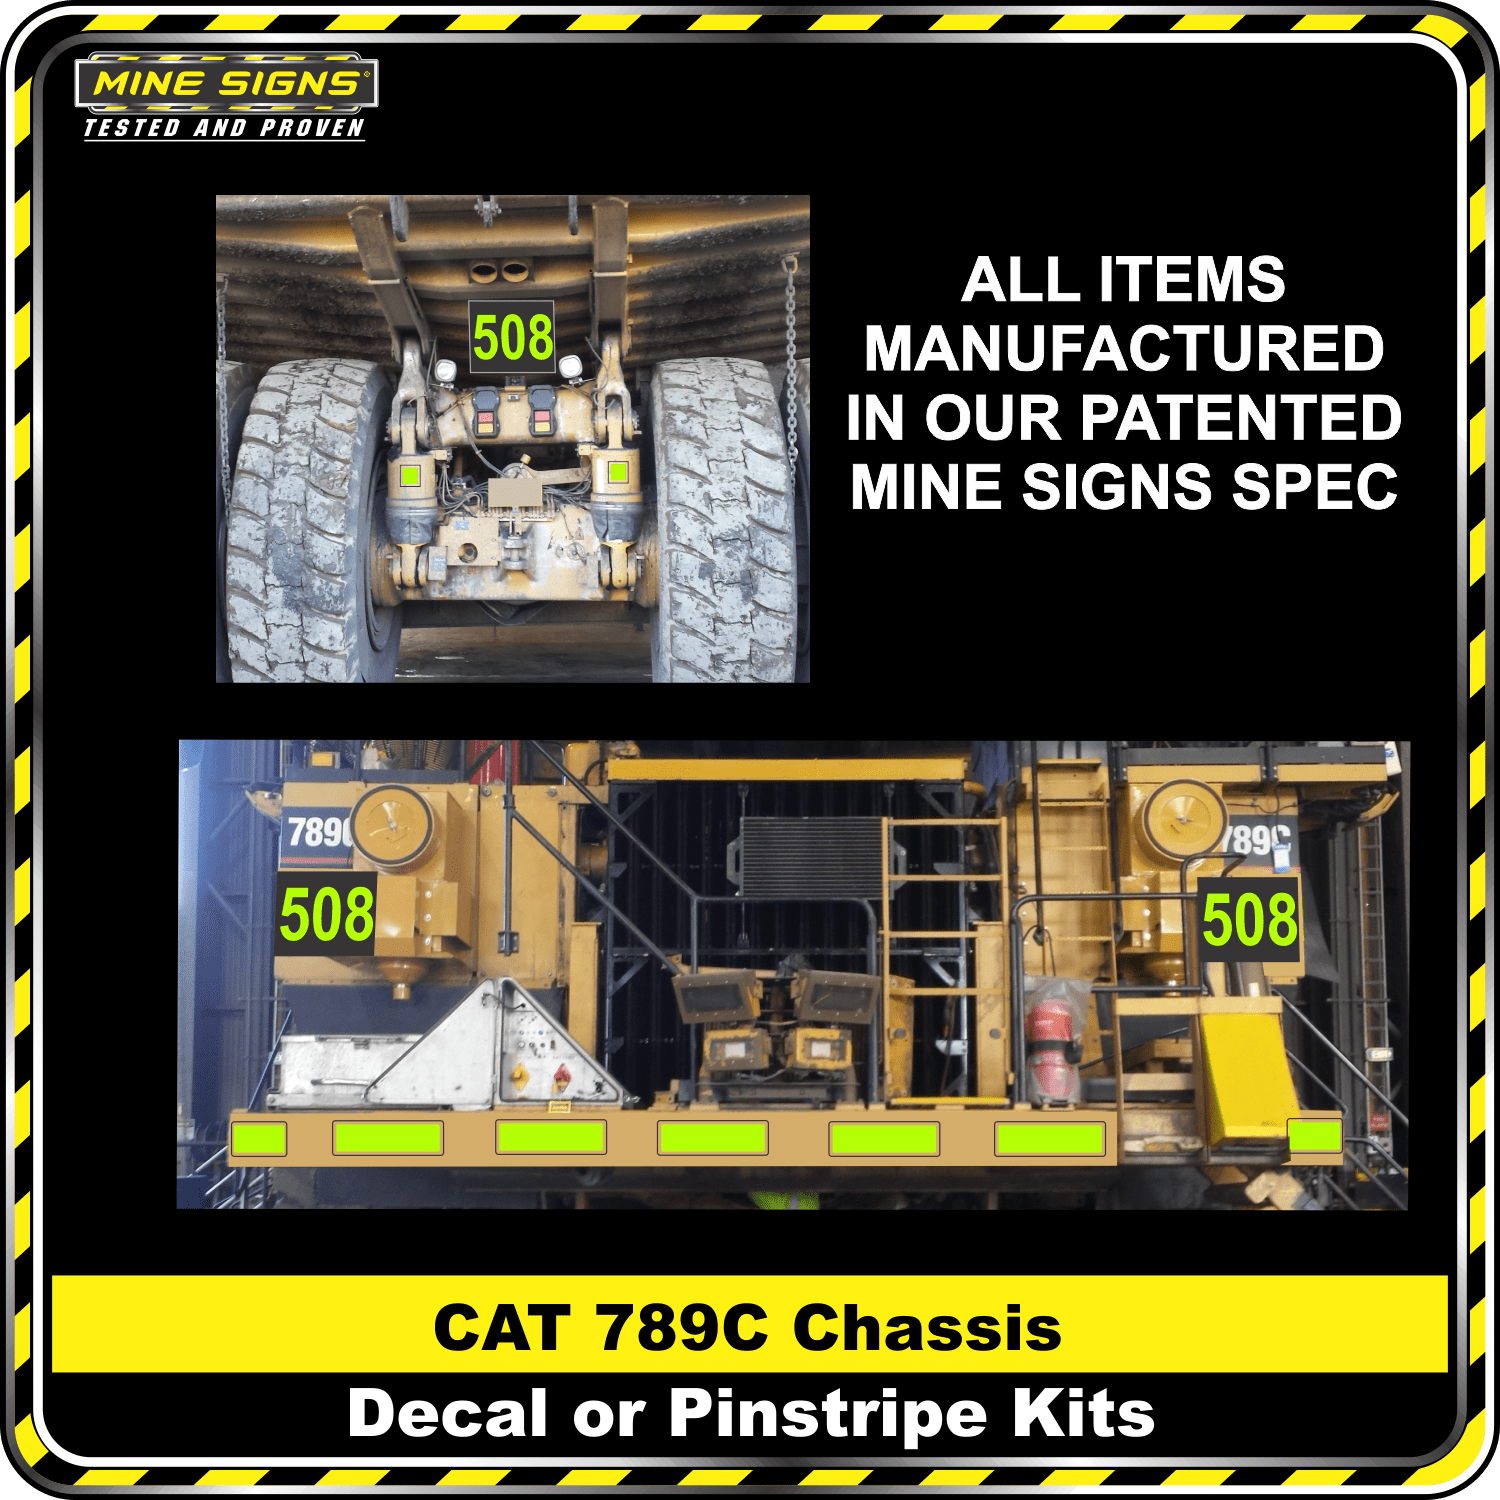 Mine Signs Spec Kit - Cat 789C Chassis decal pinstripe